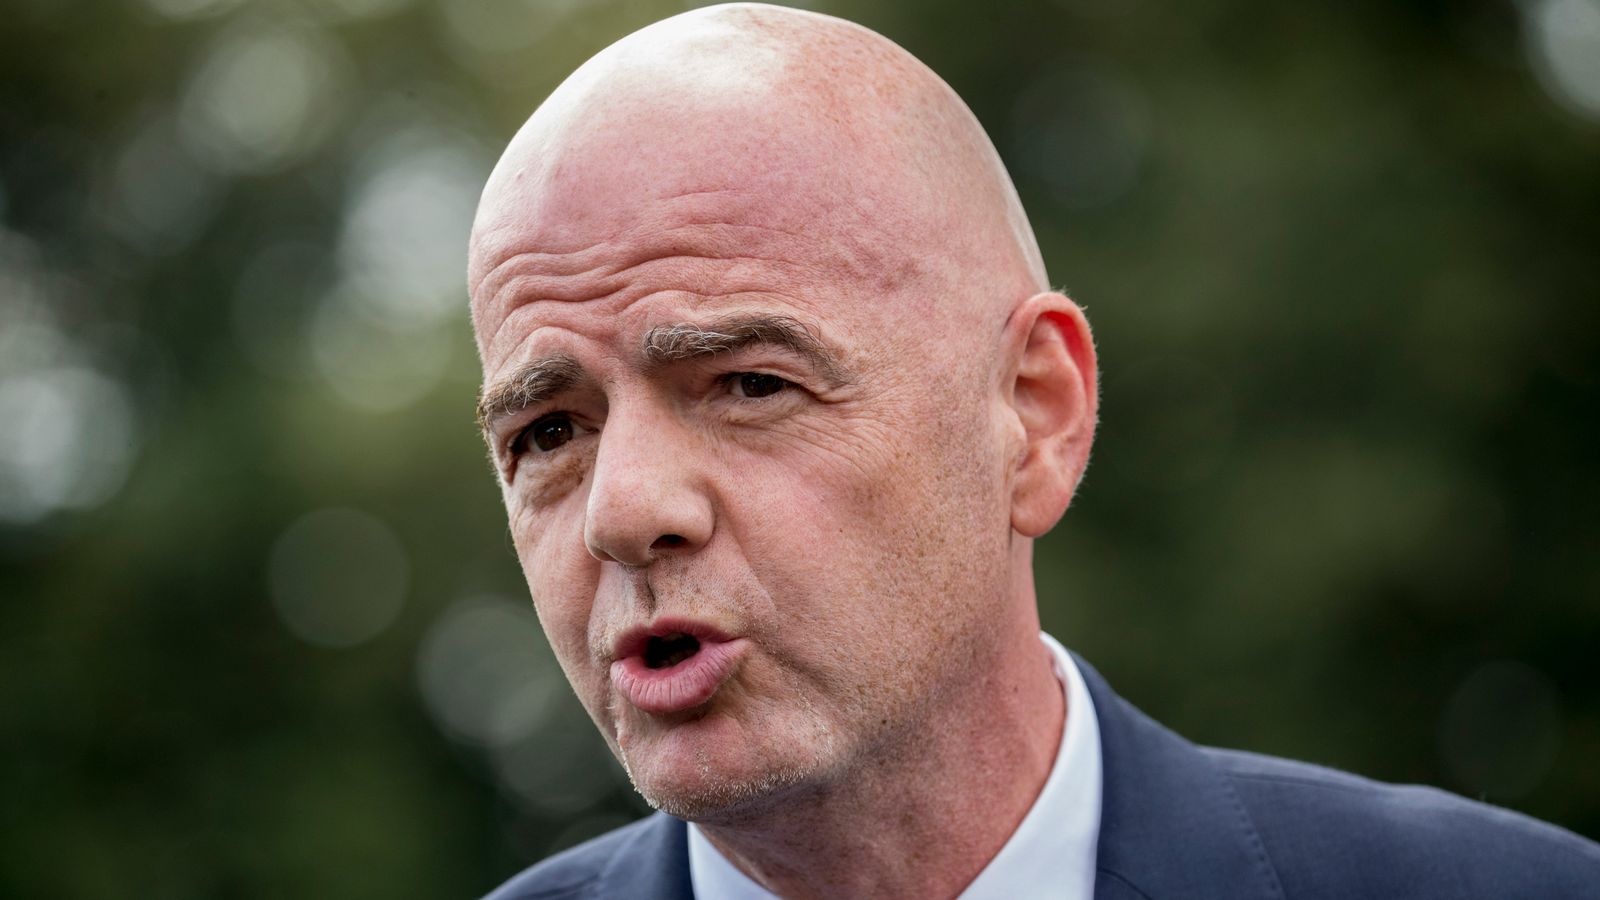 Biennial World Cup proposal defended by FIFA president Gianni Infantino